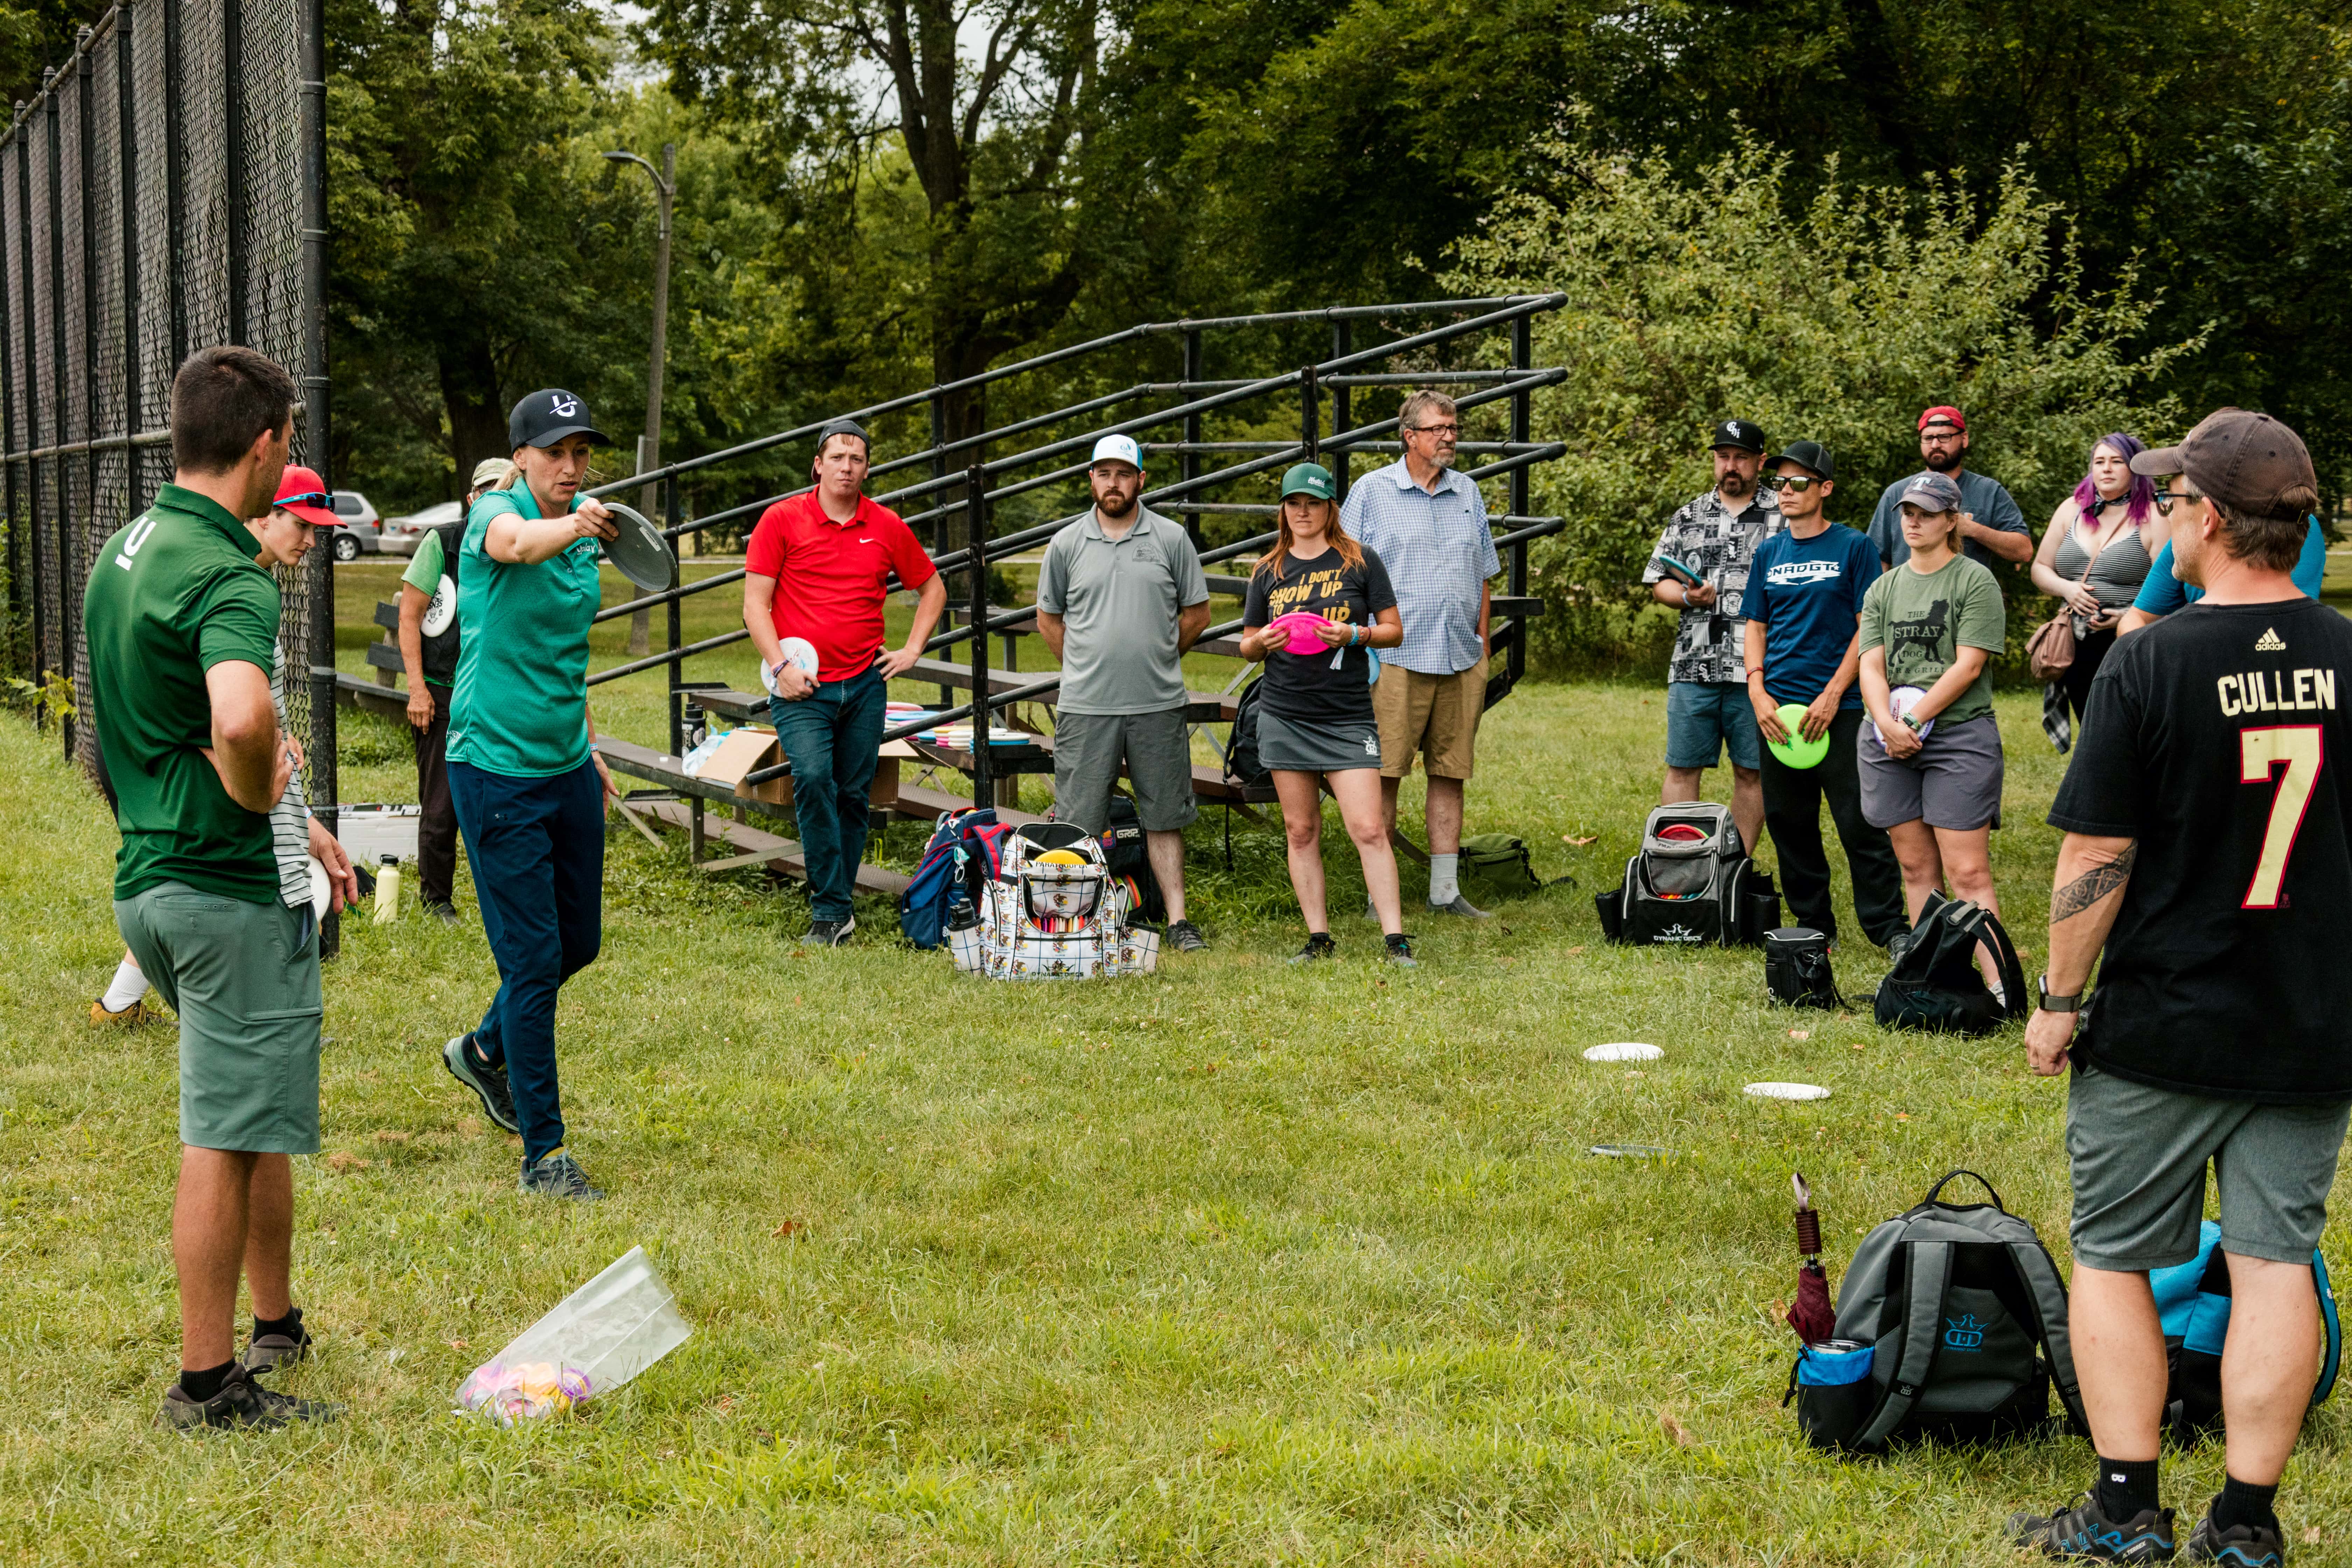 Uplay teaching disc golf during the Chicago Disc Golf Expo in August 2021